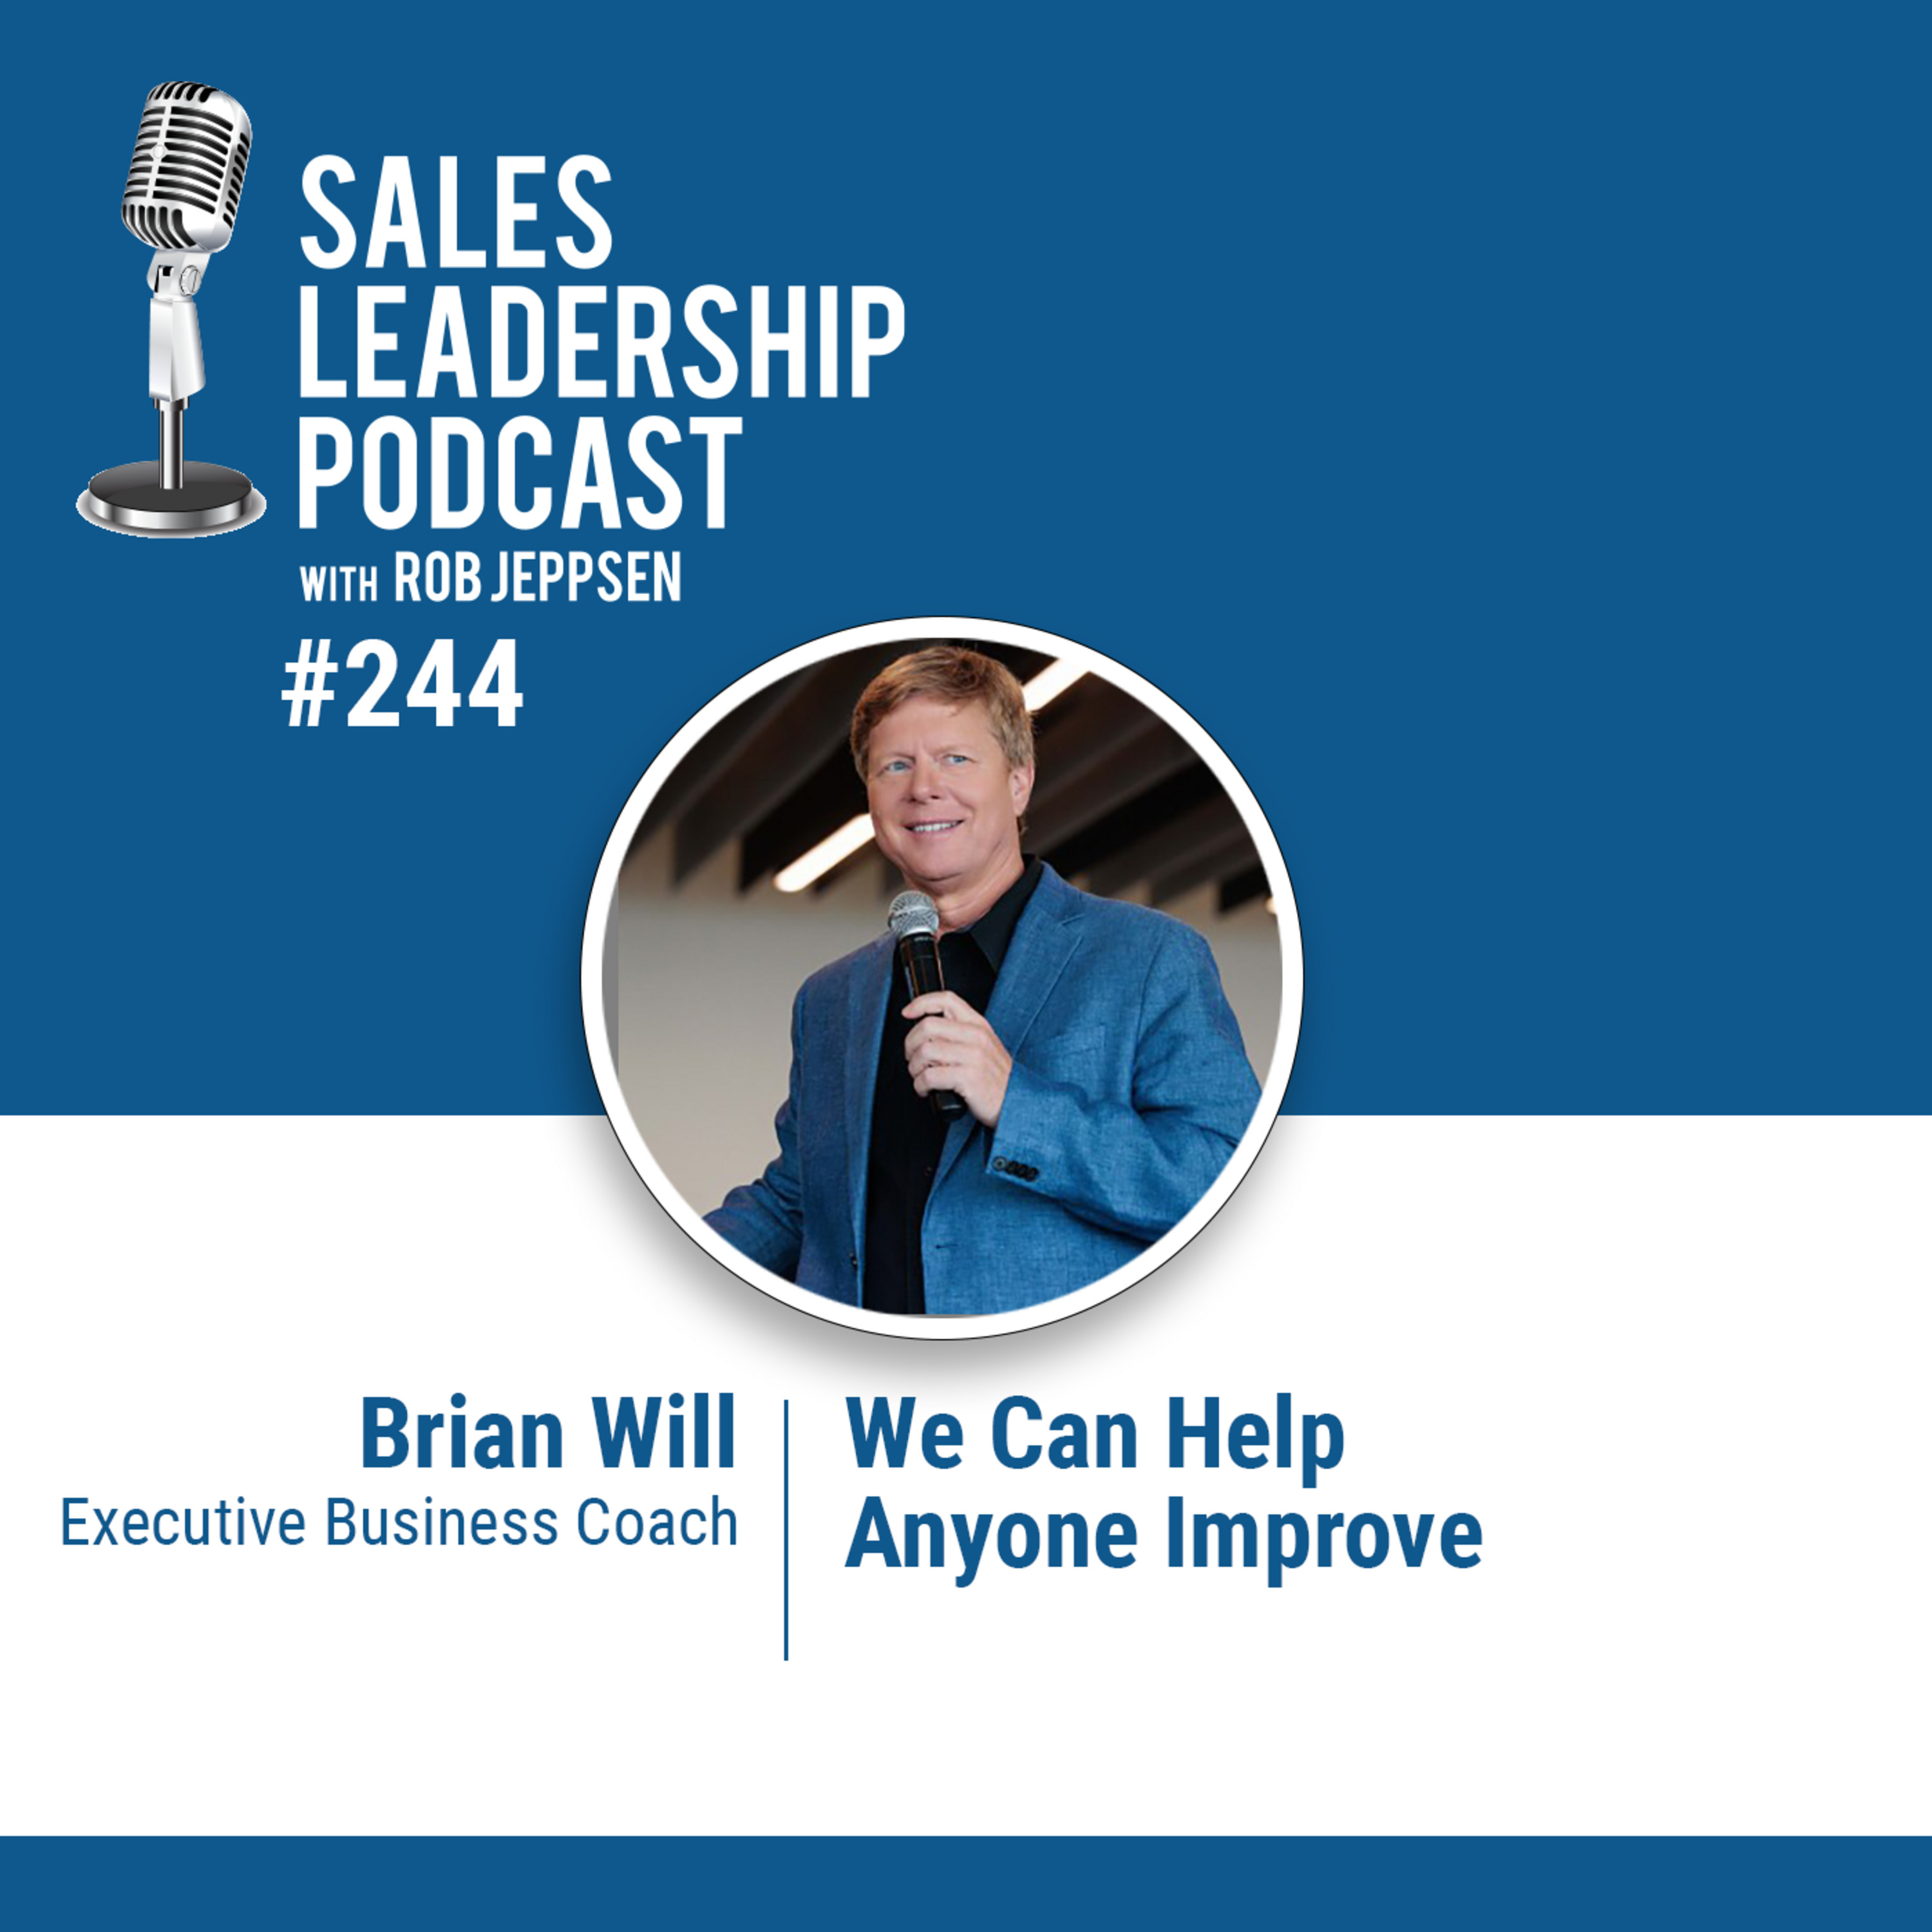 Episode 244: Brian Will, Executive Business Coach: We Can Help Anyone Improve